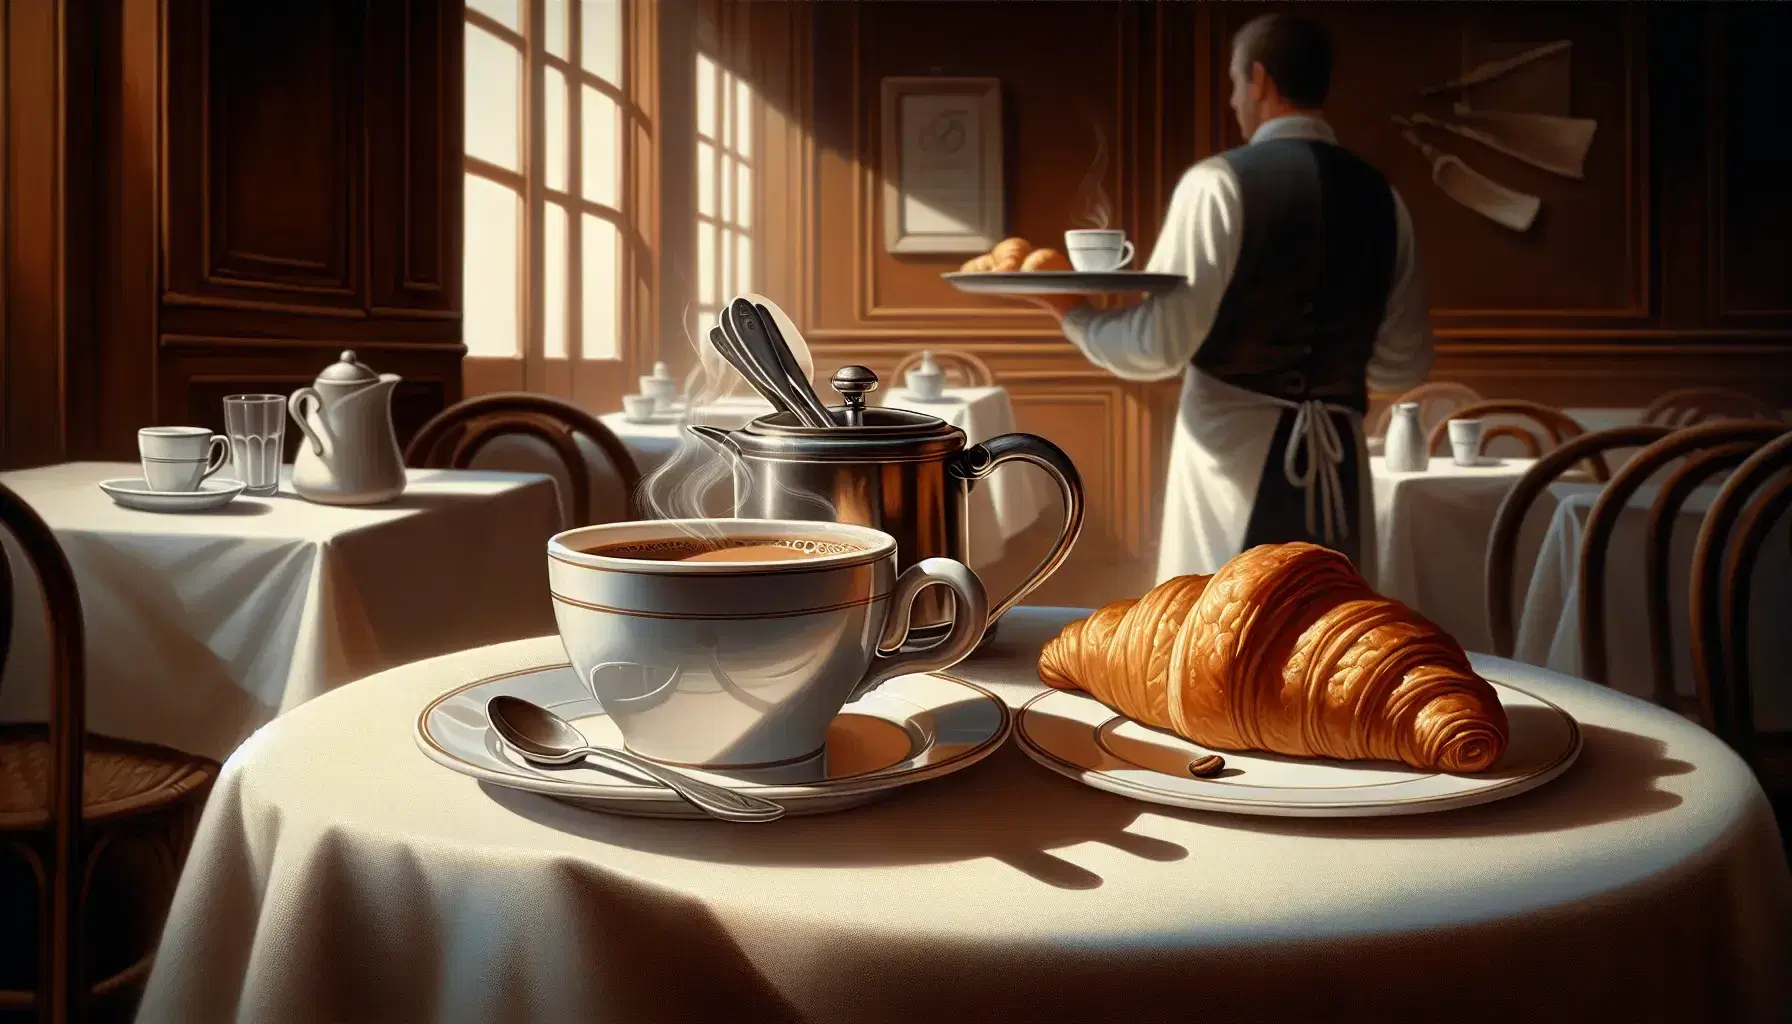 Close-up view of a steaming coffee cup and half-eaten croissant on a white tablecloth, with a blurred waiter in the background at a French café.